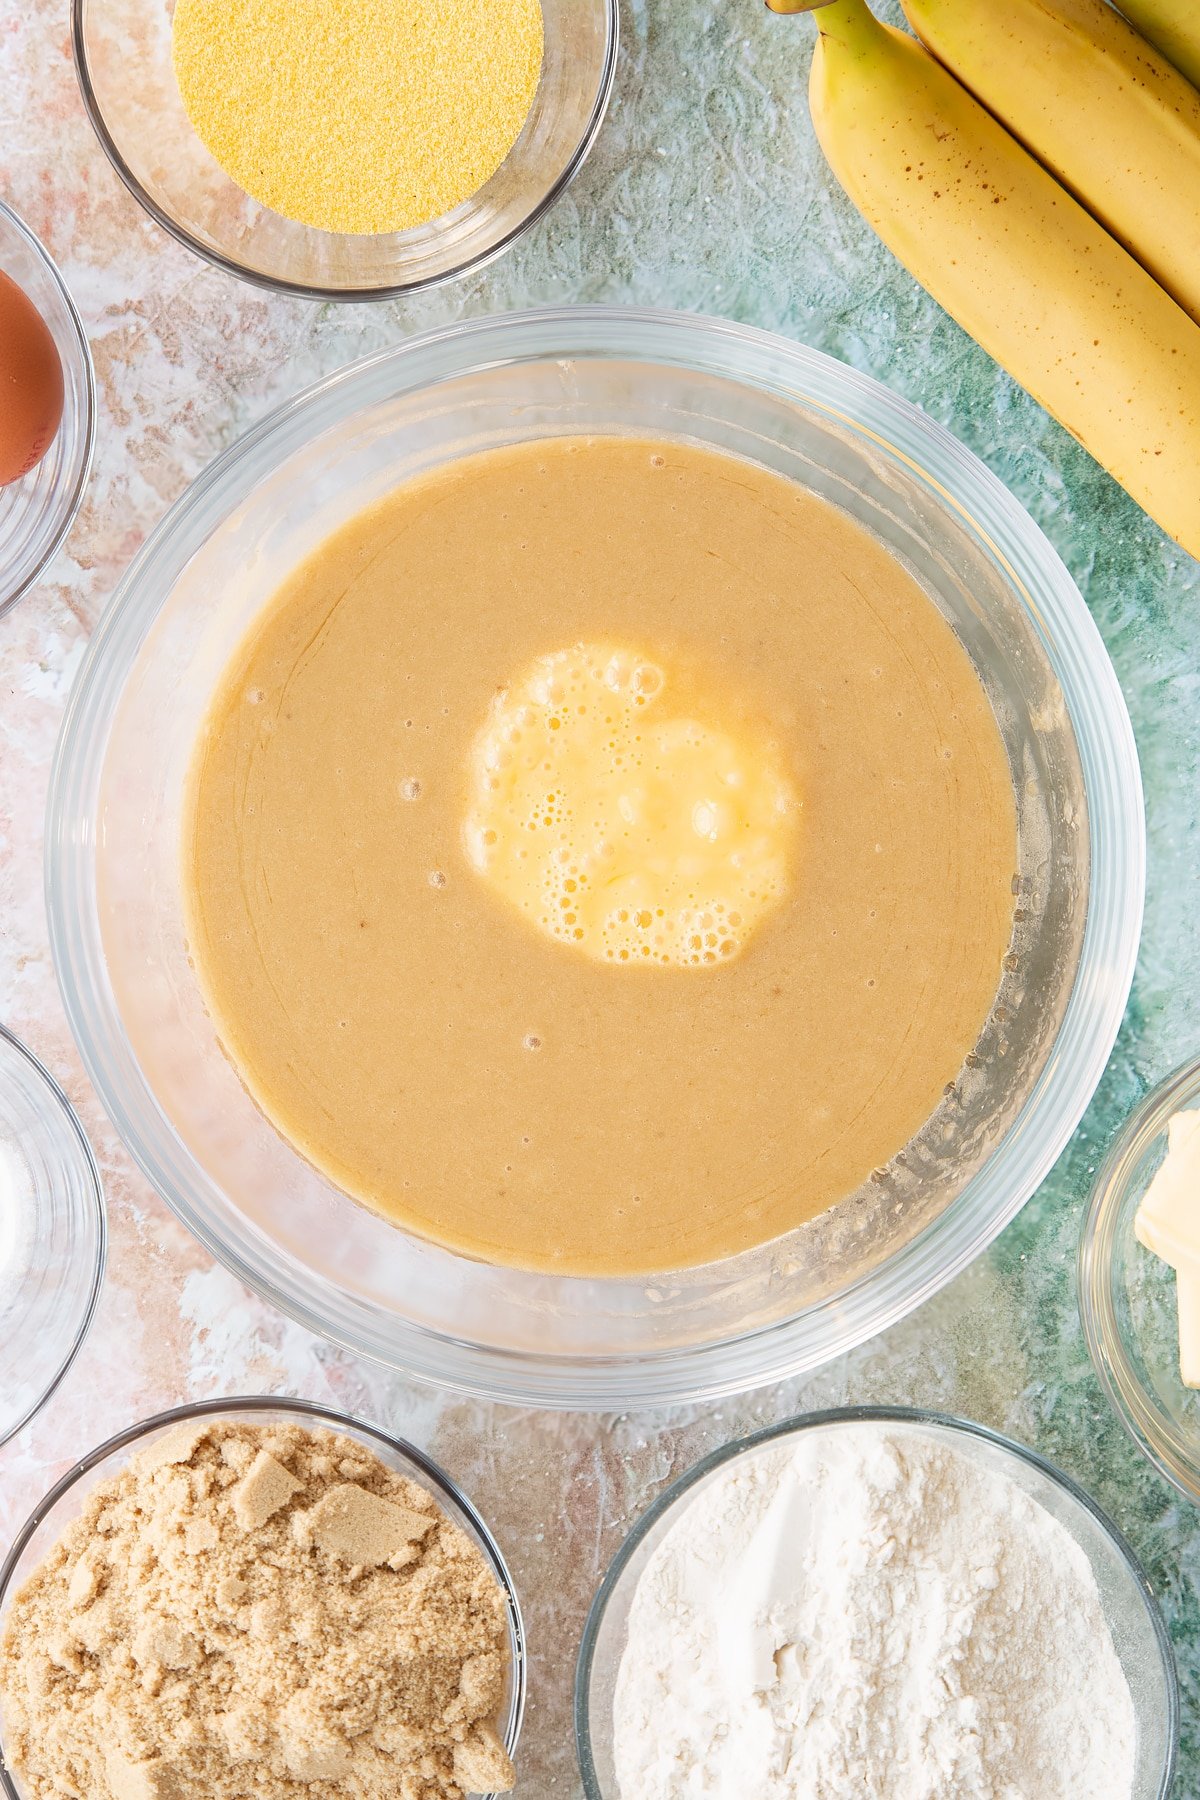 Mashed bananas, melted butter and sugar mixed together in a bowl with beaten eggs on top. Ingredients to make banana cornmeal muffin surround the bowl.